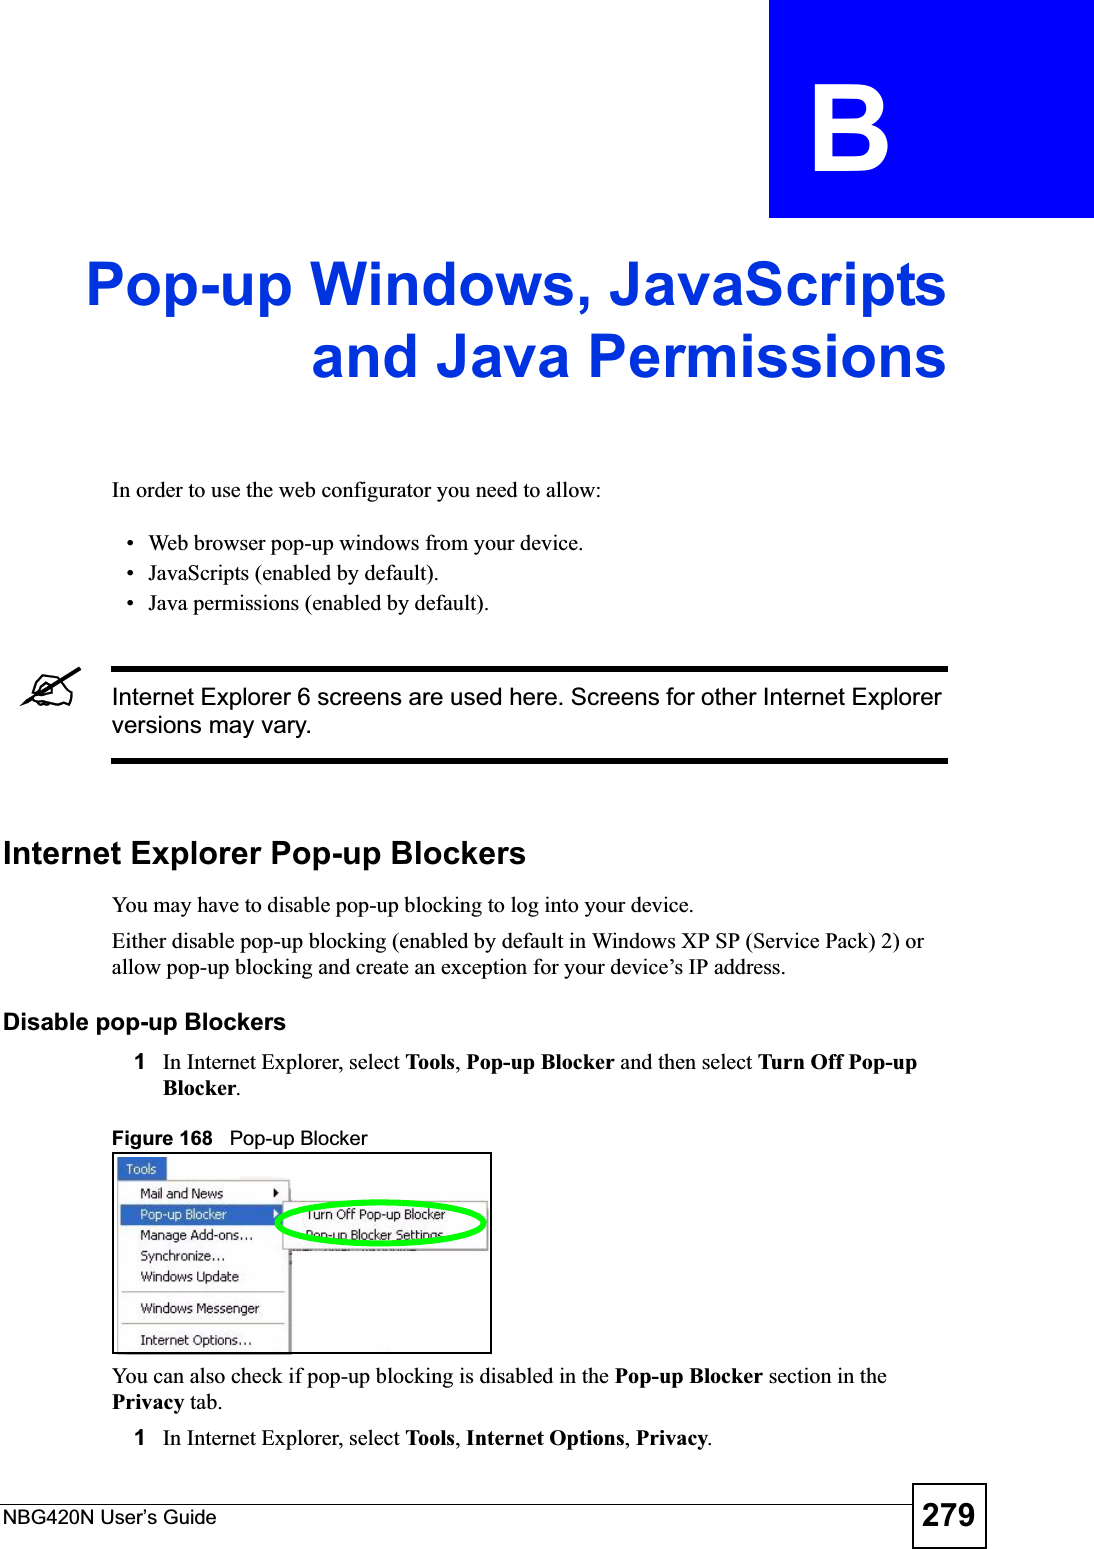 NBG420N User’s Guide 279APPENDIX  B Pop-up Windows, JavaScriptsand Java PermissionsIn order to use the web configurator you need to allow:• Web browser pop-up windows from your device.• JavaScripts (enabled by default).• Java permissions (enabled by default).&quot;Internet Explorer 6 screens are used here. Screens for other Internet Explorer versions may vary.Internet Explorer Pop-up BlockersYou may have to disable pop-up blocking to log into your device. Either disable pop-up blocking (enabled by default in Windows XP SP (Service Pack) 2) or allow pop-up blocking and create an exception for your device’s IP address.Disable pop-up Blockers1In Internet Explorer, select To ols,Pop-up Blocker and then select Turn Off Pop-up Blocker.Figure 168   Pop-up BlockerYou can also check if pop-up blocking is disabled in the Pop-up Blocker section in the Privacy tab. 1In Internet Explorer, select To ol s,Internet Options,Privacy.